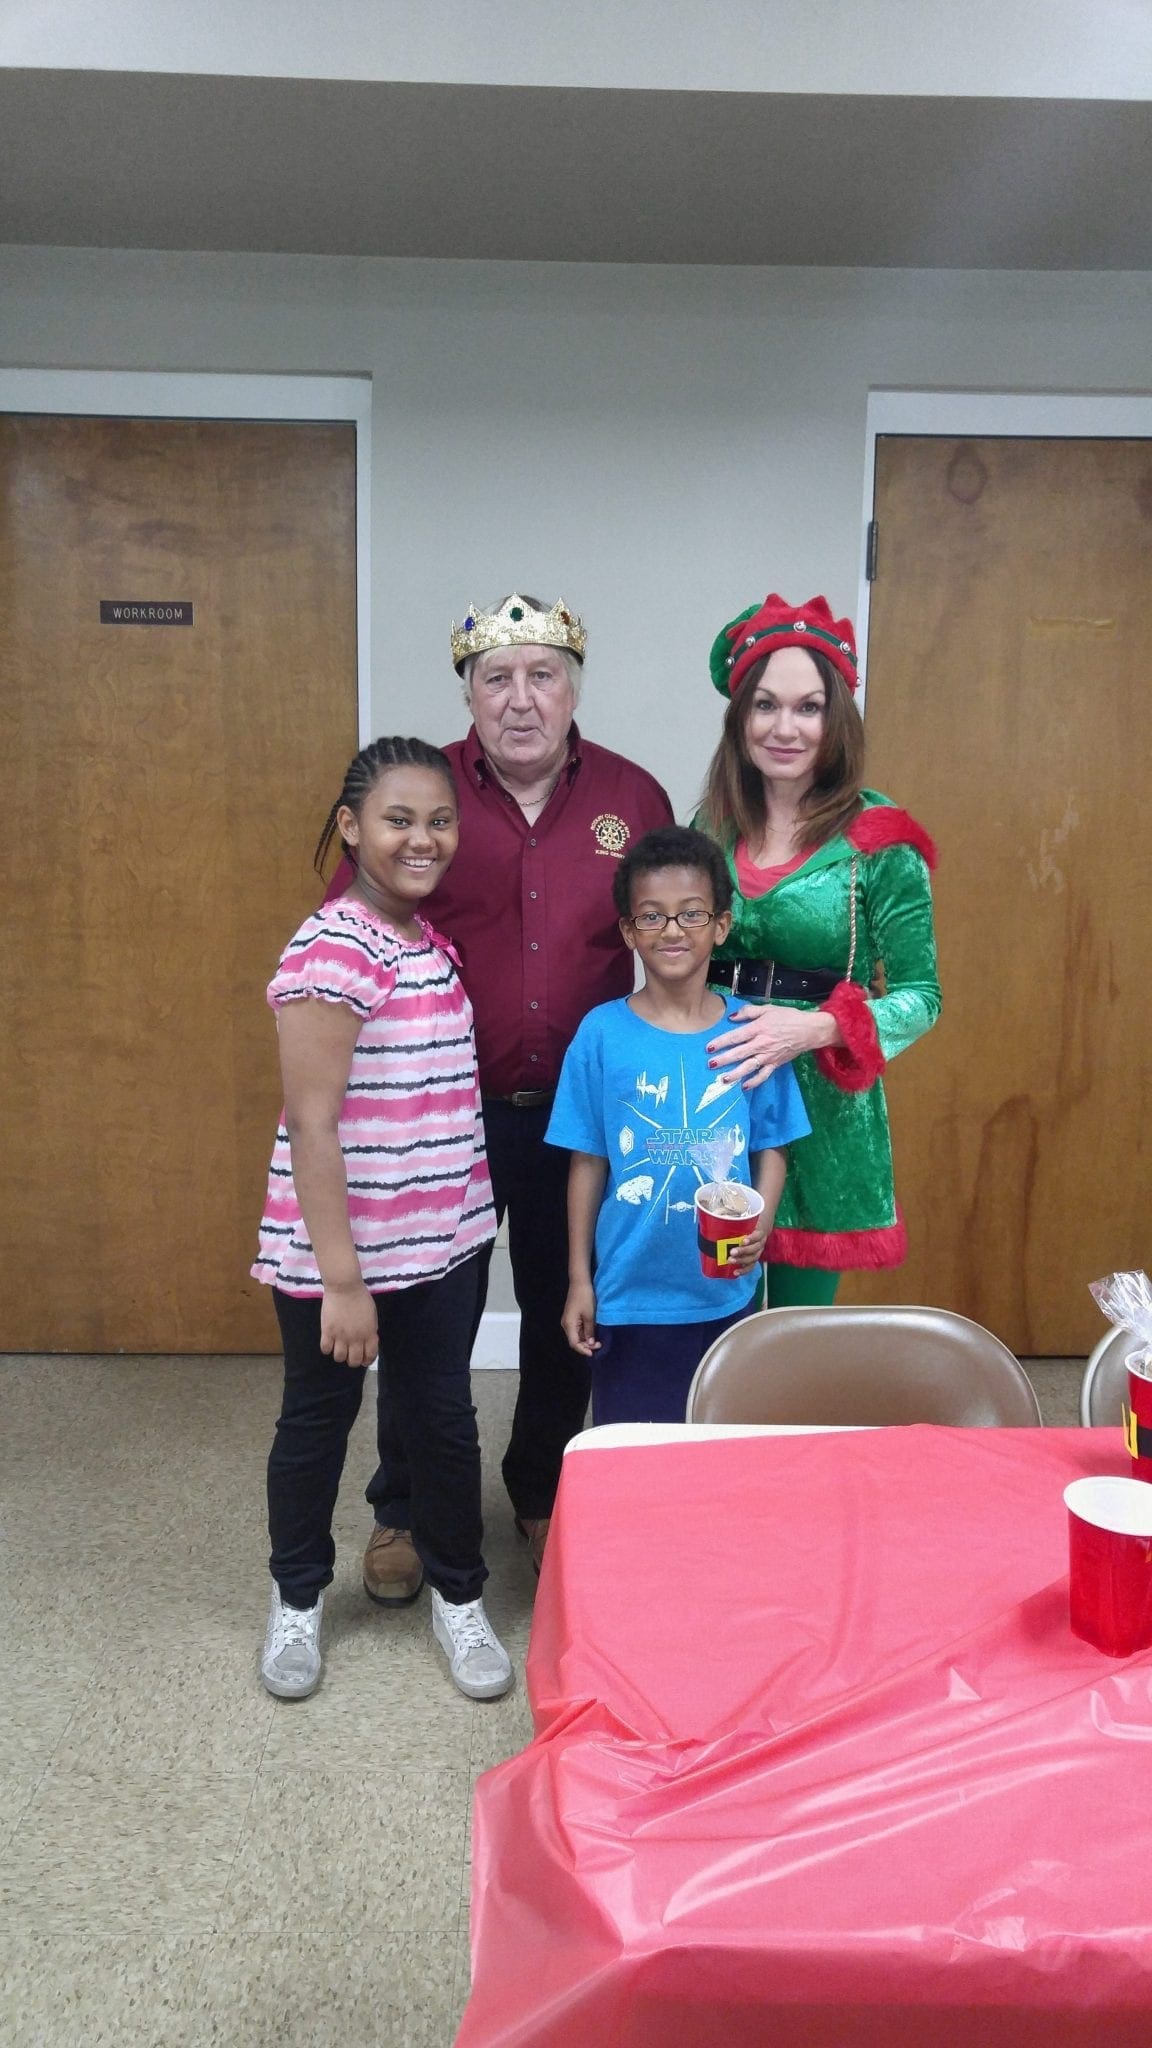 King Pithla at Healthy Families Brunch with Santa